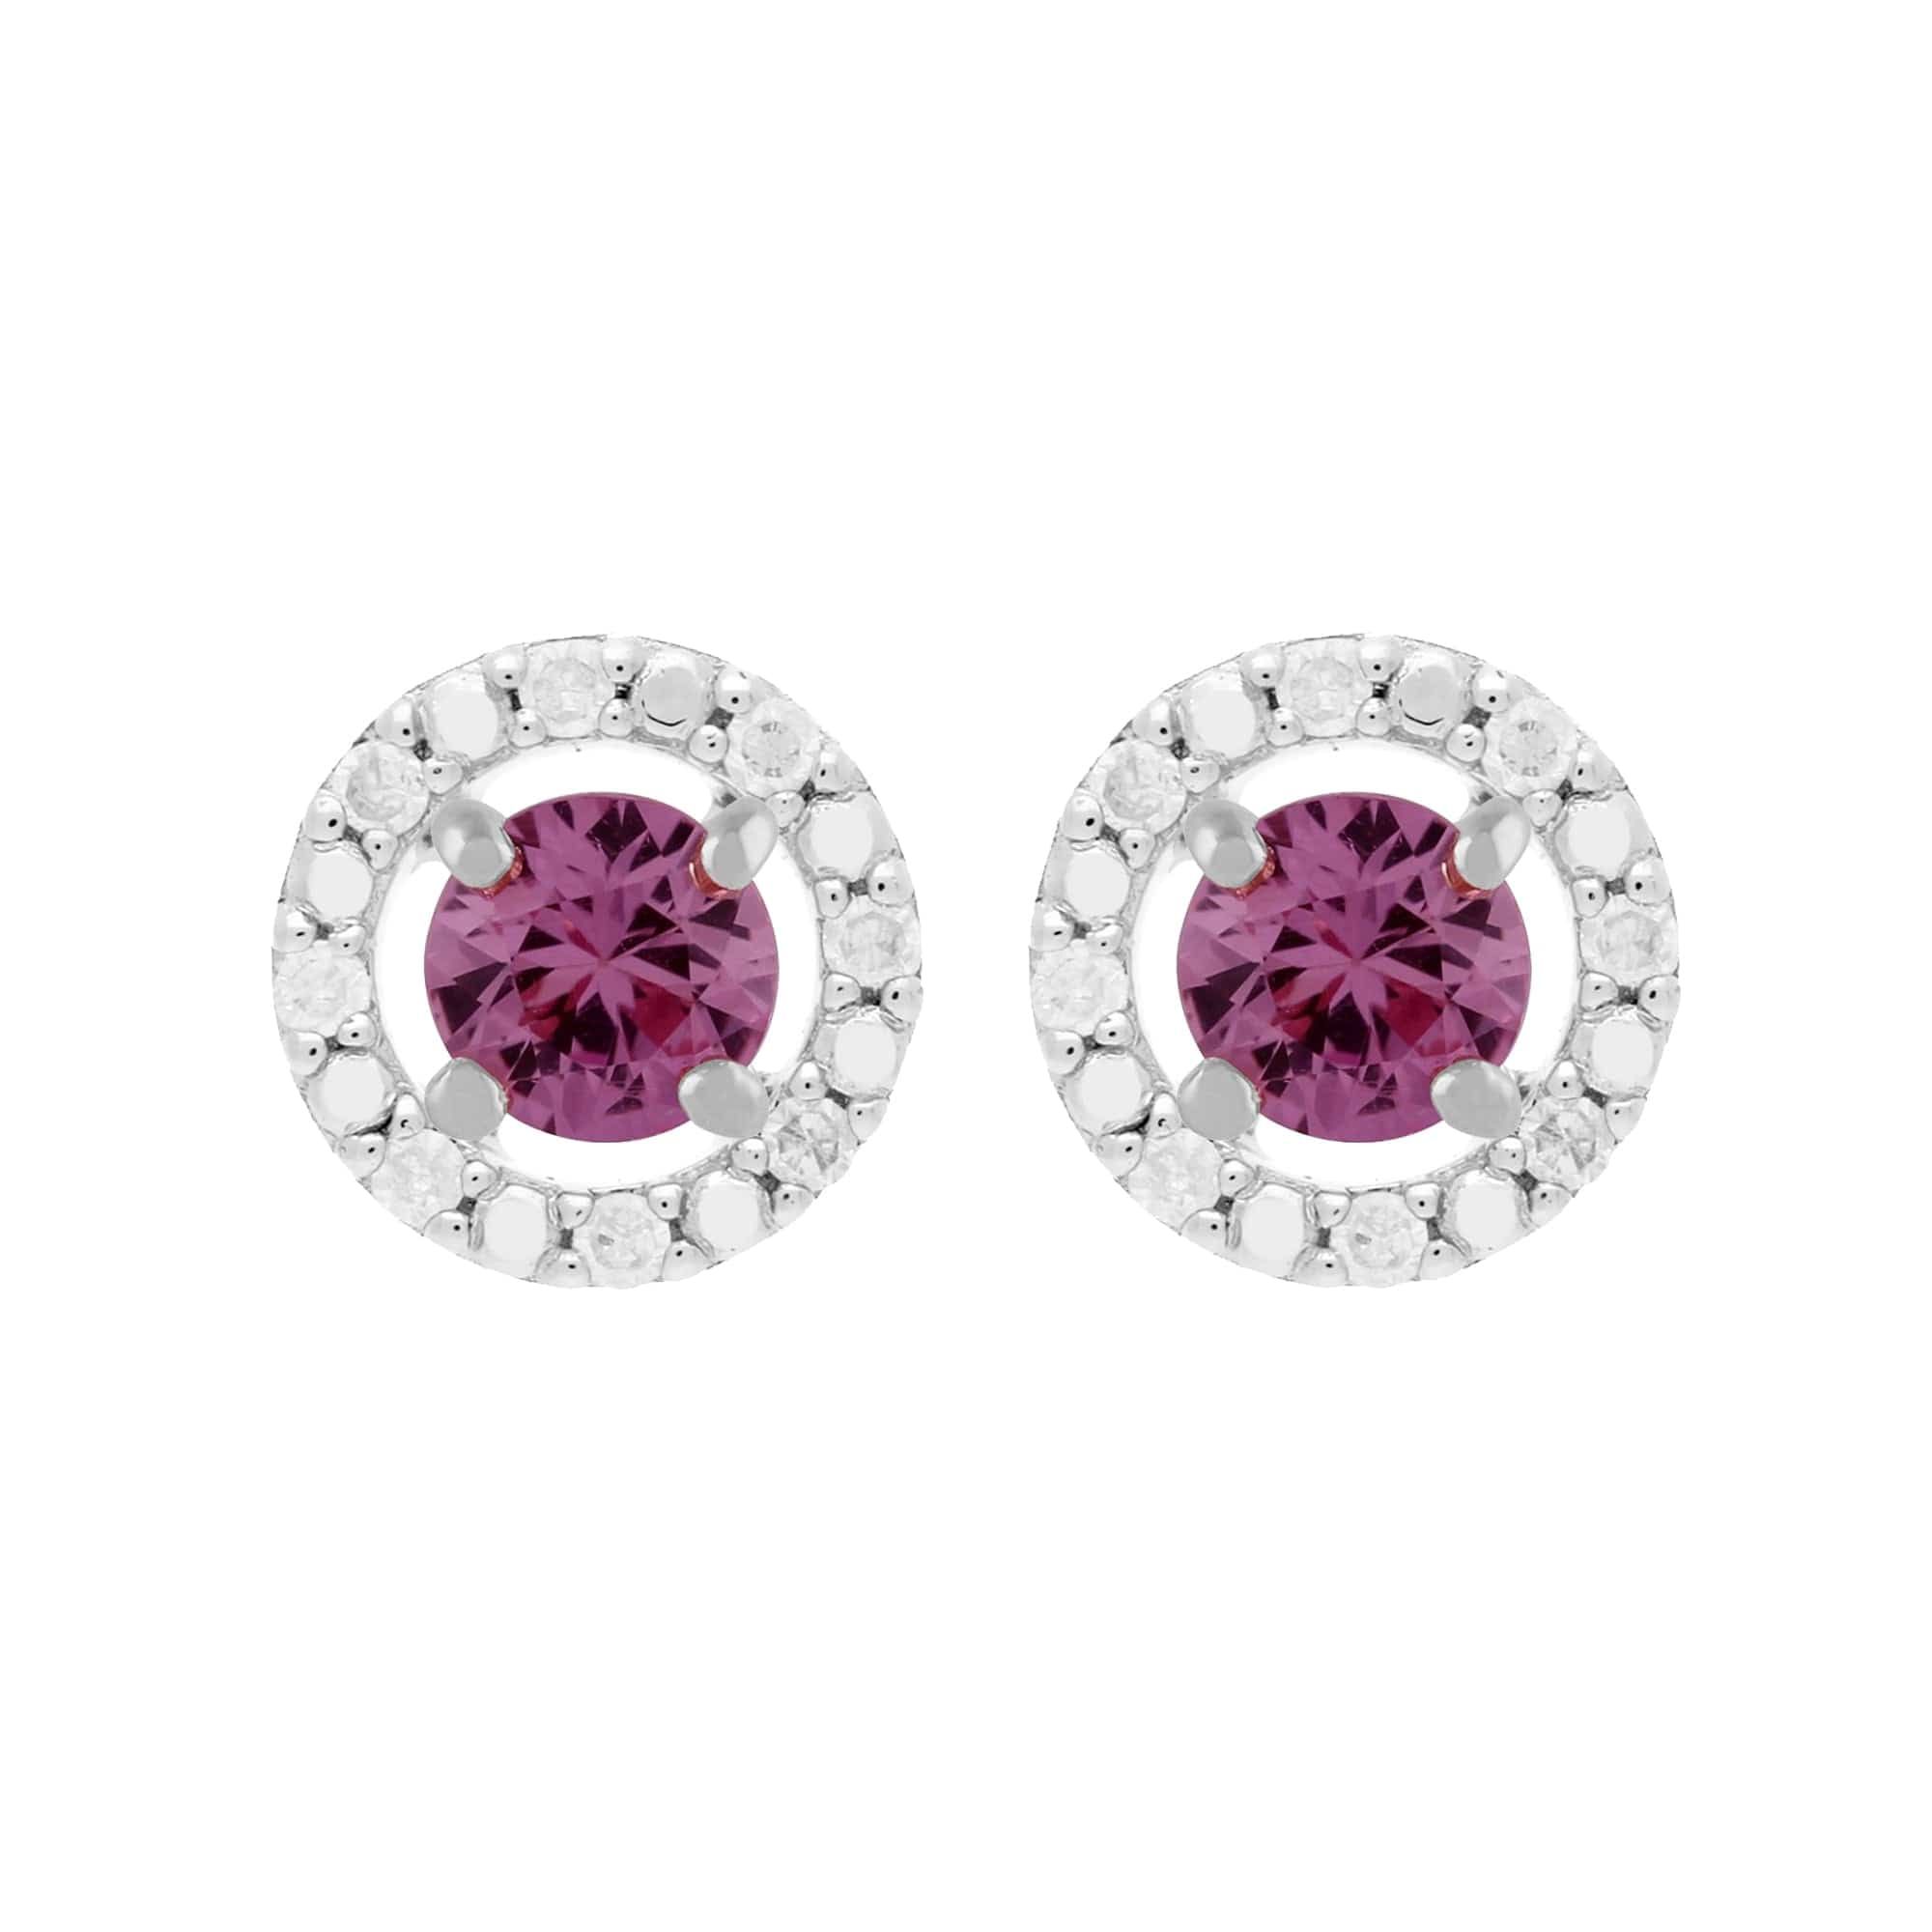 117E0031159-162E0228019 Classic Round Pink Sapphire Stud Earrings and Detachable Diamond Round Jacket in 9ct White Gold 1